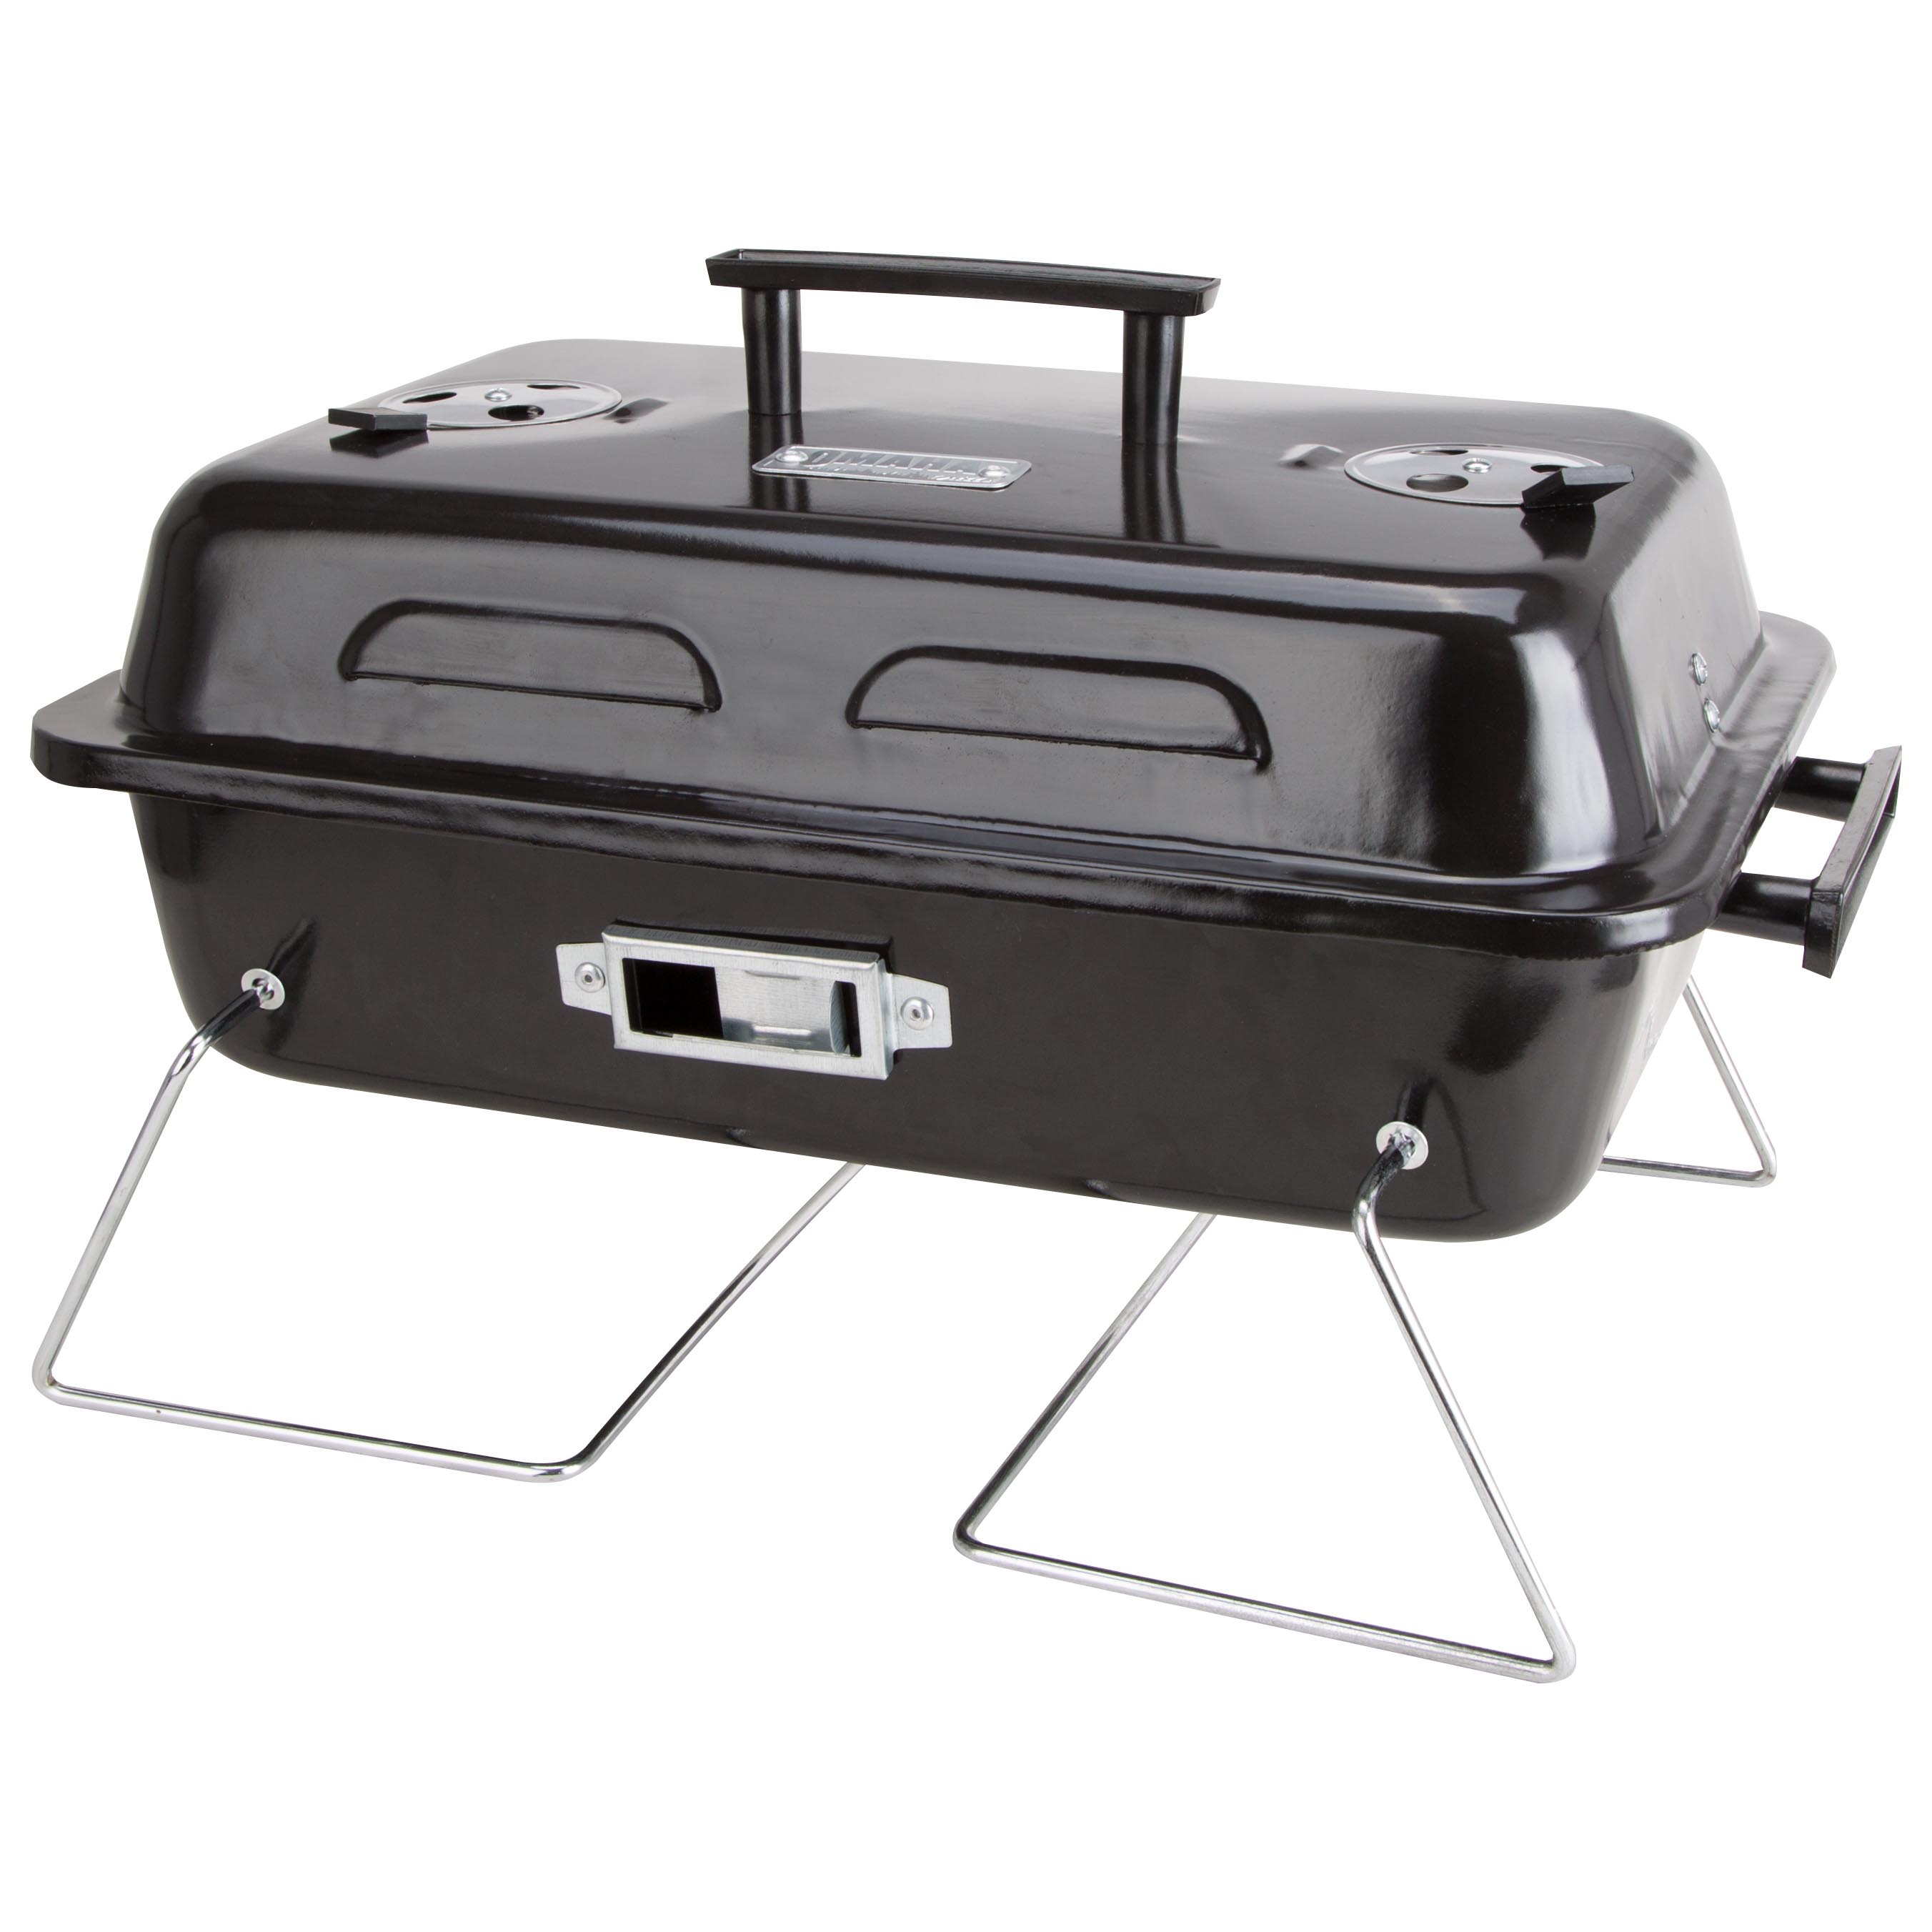 Portable Charcoal Grill, 2-Grate, 168 sq-in Primary Cooking Surface, Black, Steel Body